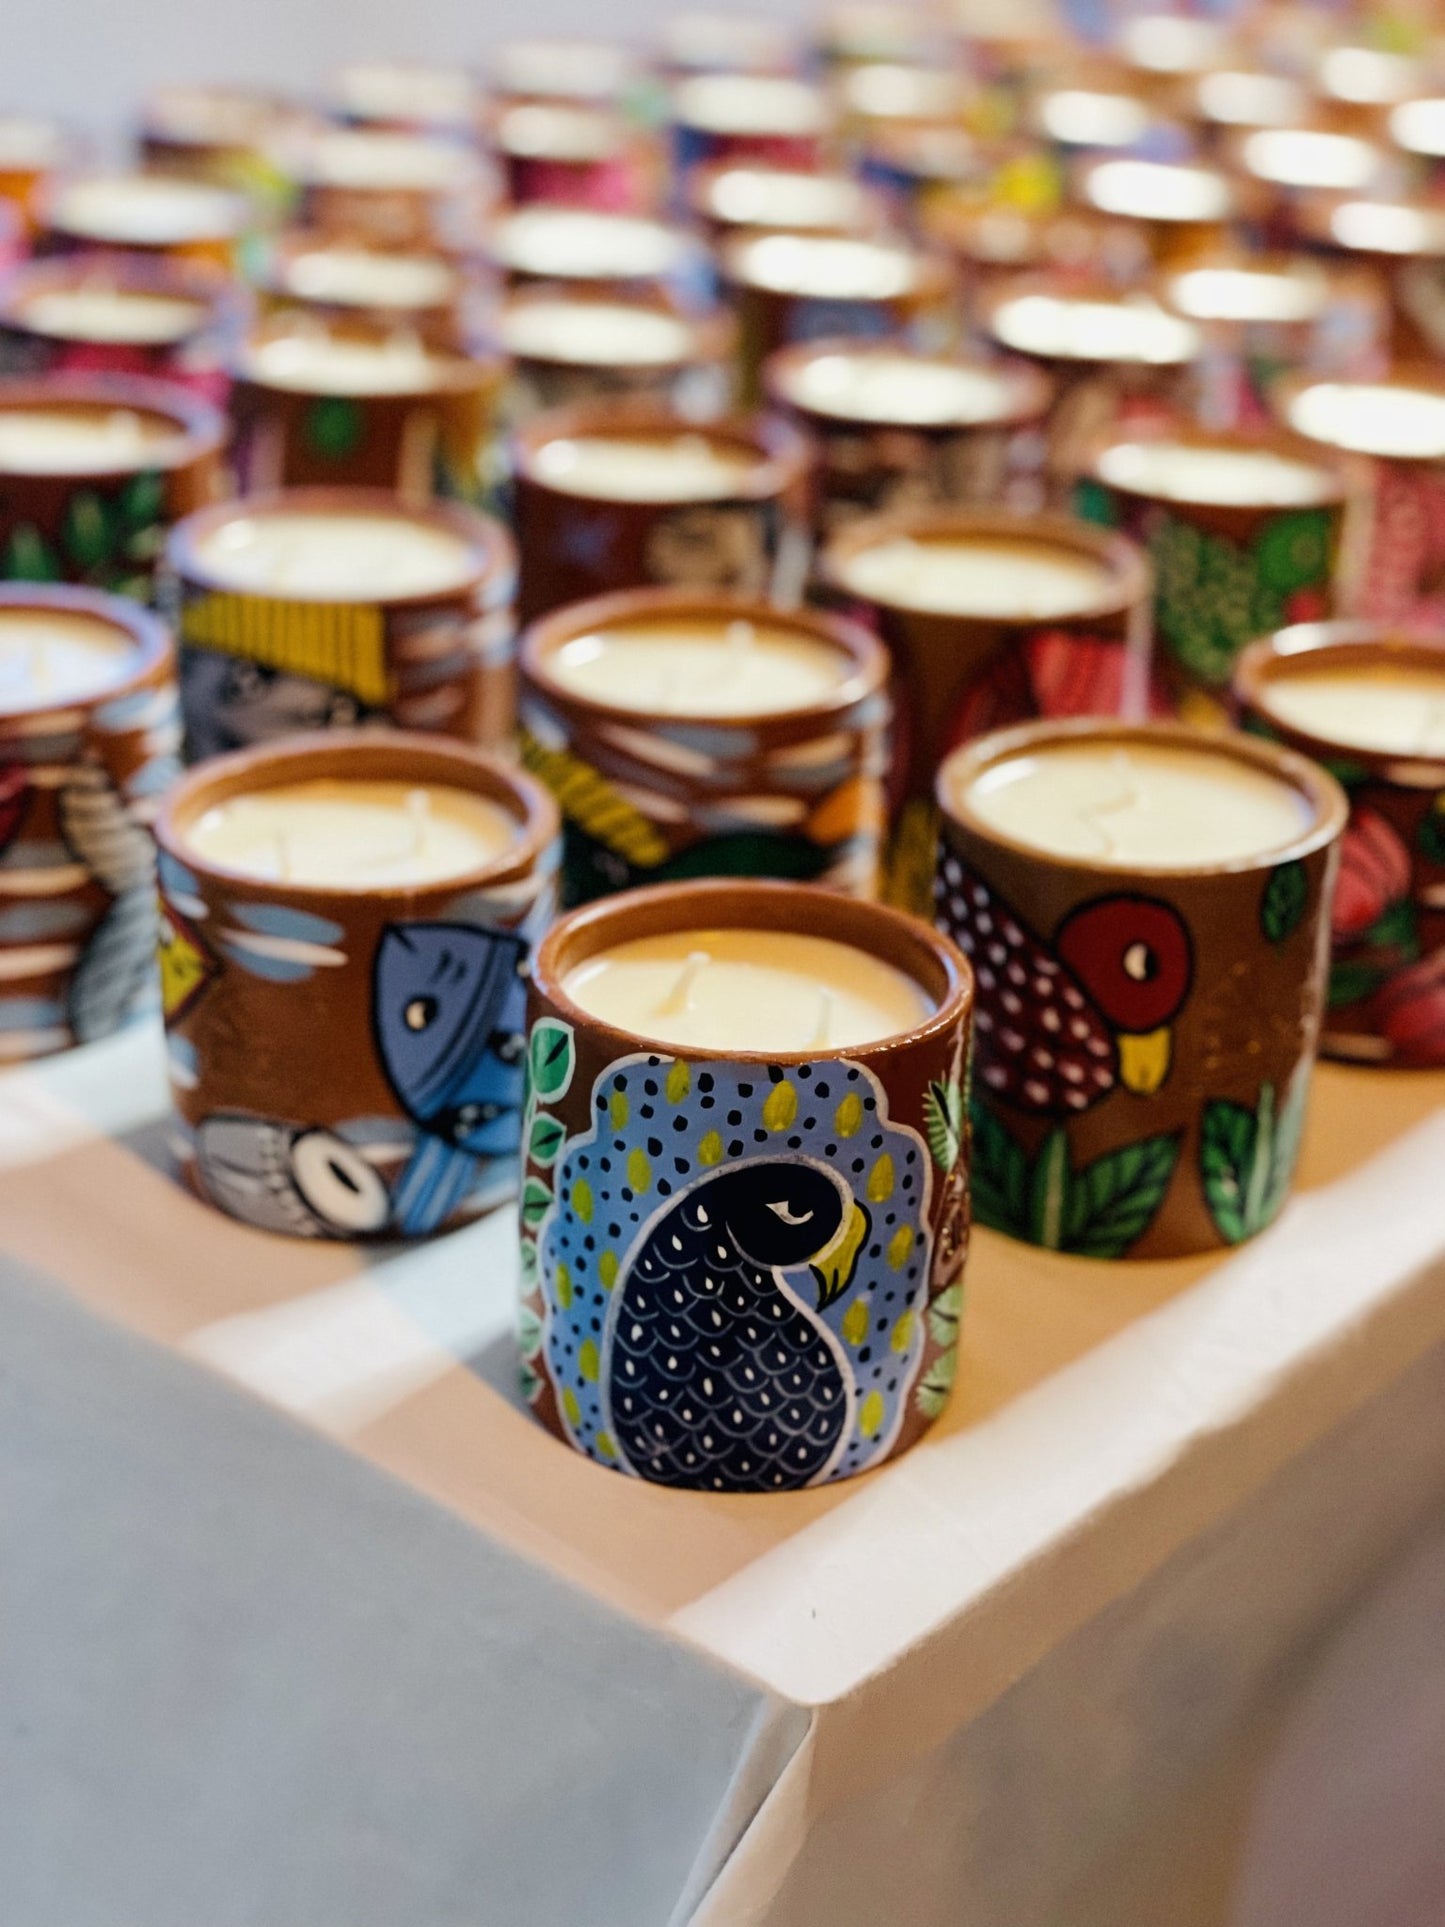 100% natural soy wax scented candles in terracotta jars with paintings of birds, peacocks and fish are displayed on a table covered with white cloth.